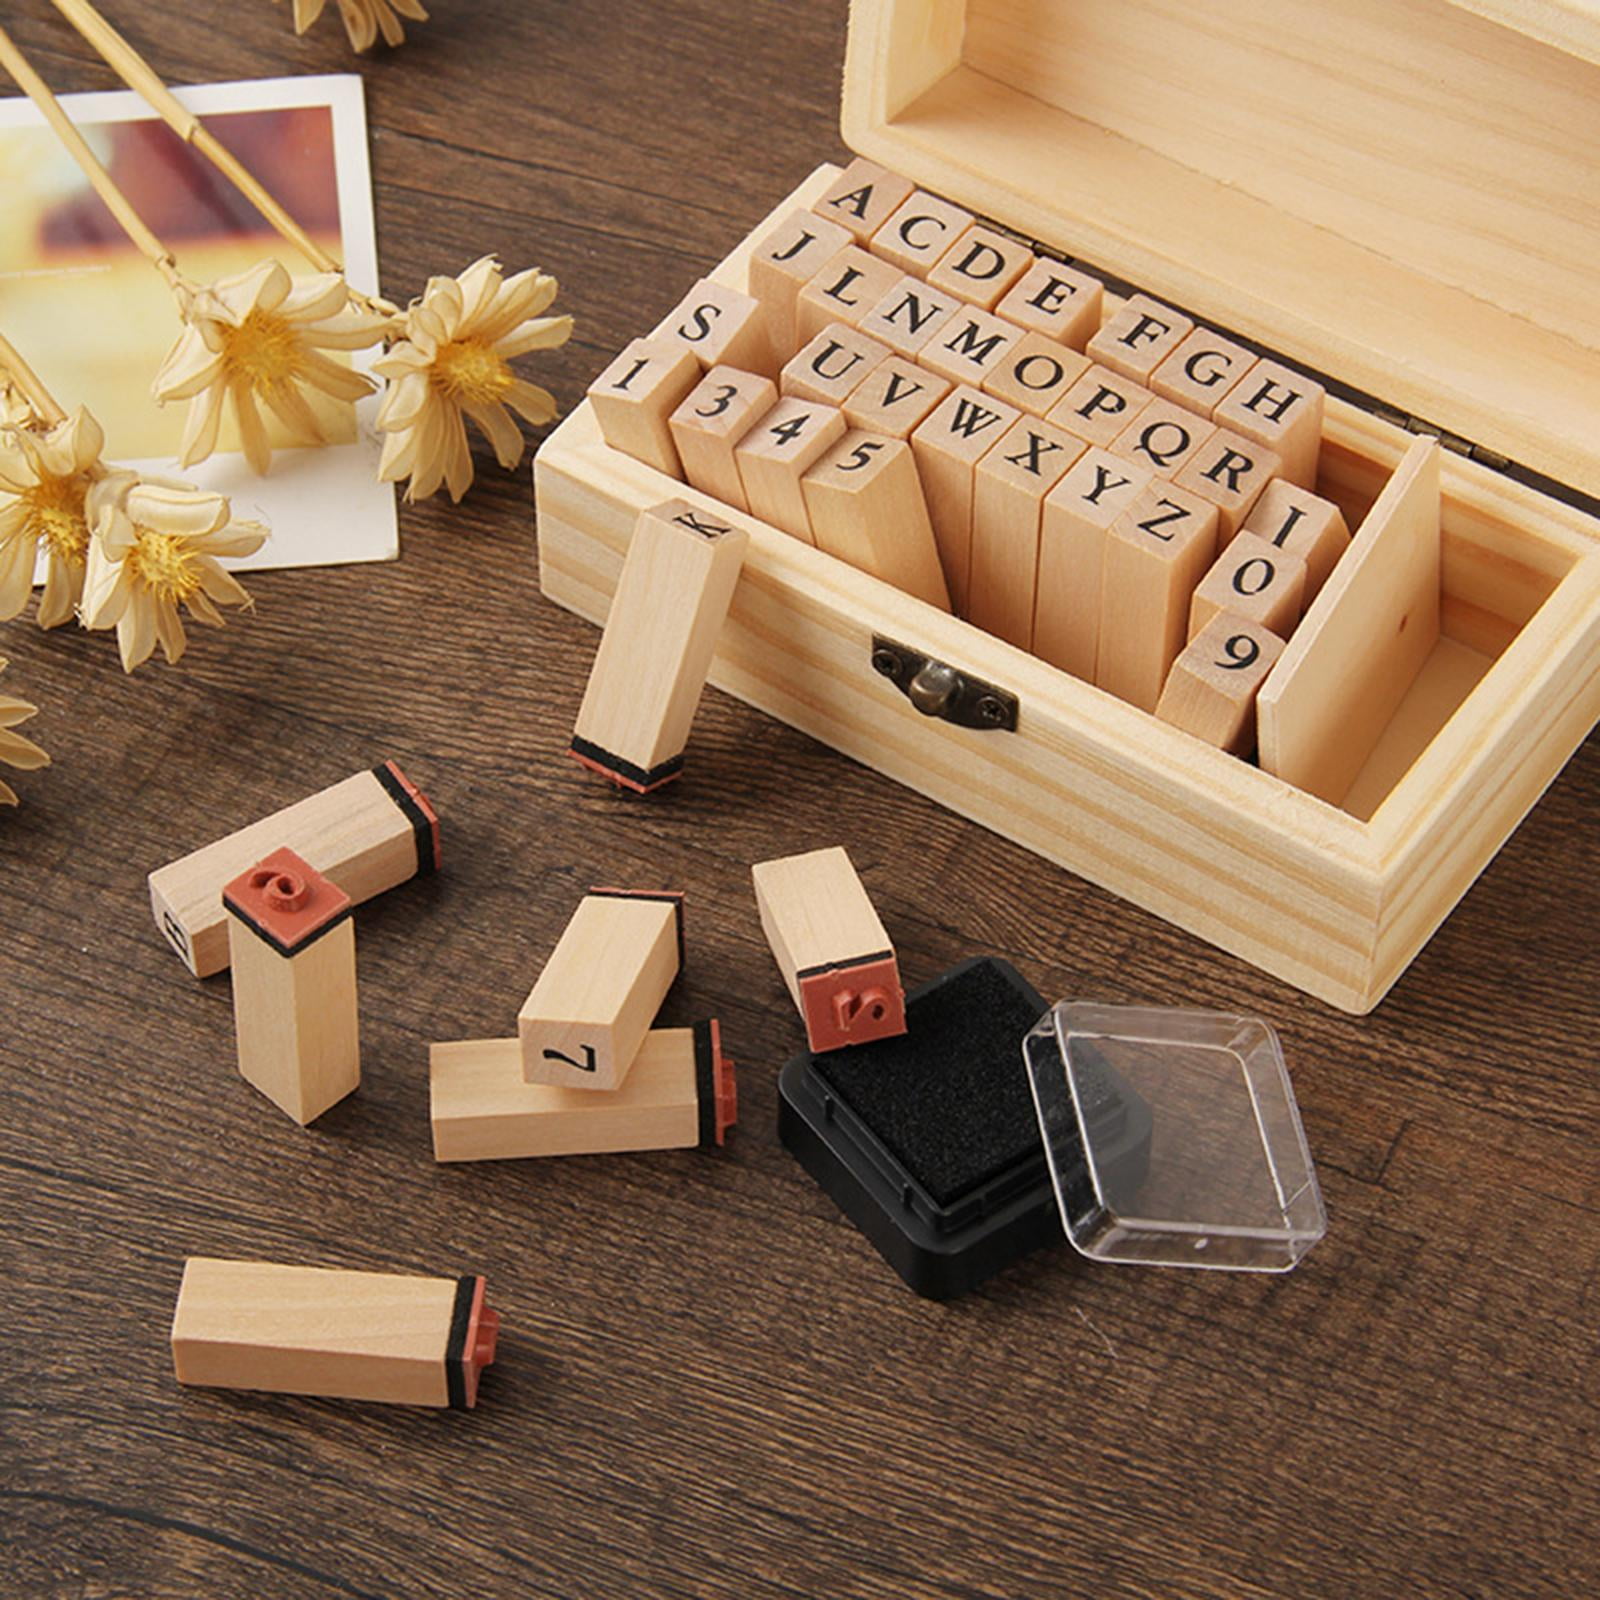  Udefineit 70PCS Alphabet Stamps, Vintage Wood Typewriter Stamps,  Decorative Rubber A-Z Letters 0-9 Numbers Symbols Stamp Set with Wooden Box  for DIY Craft Card Scrapbooking Making Painting Teaching : Arts, Crafts